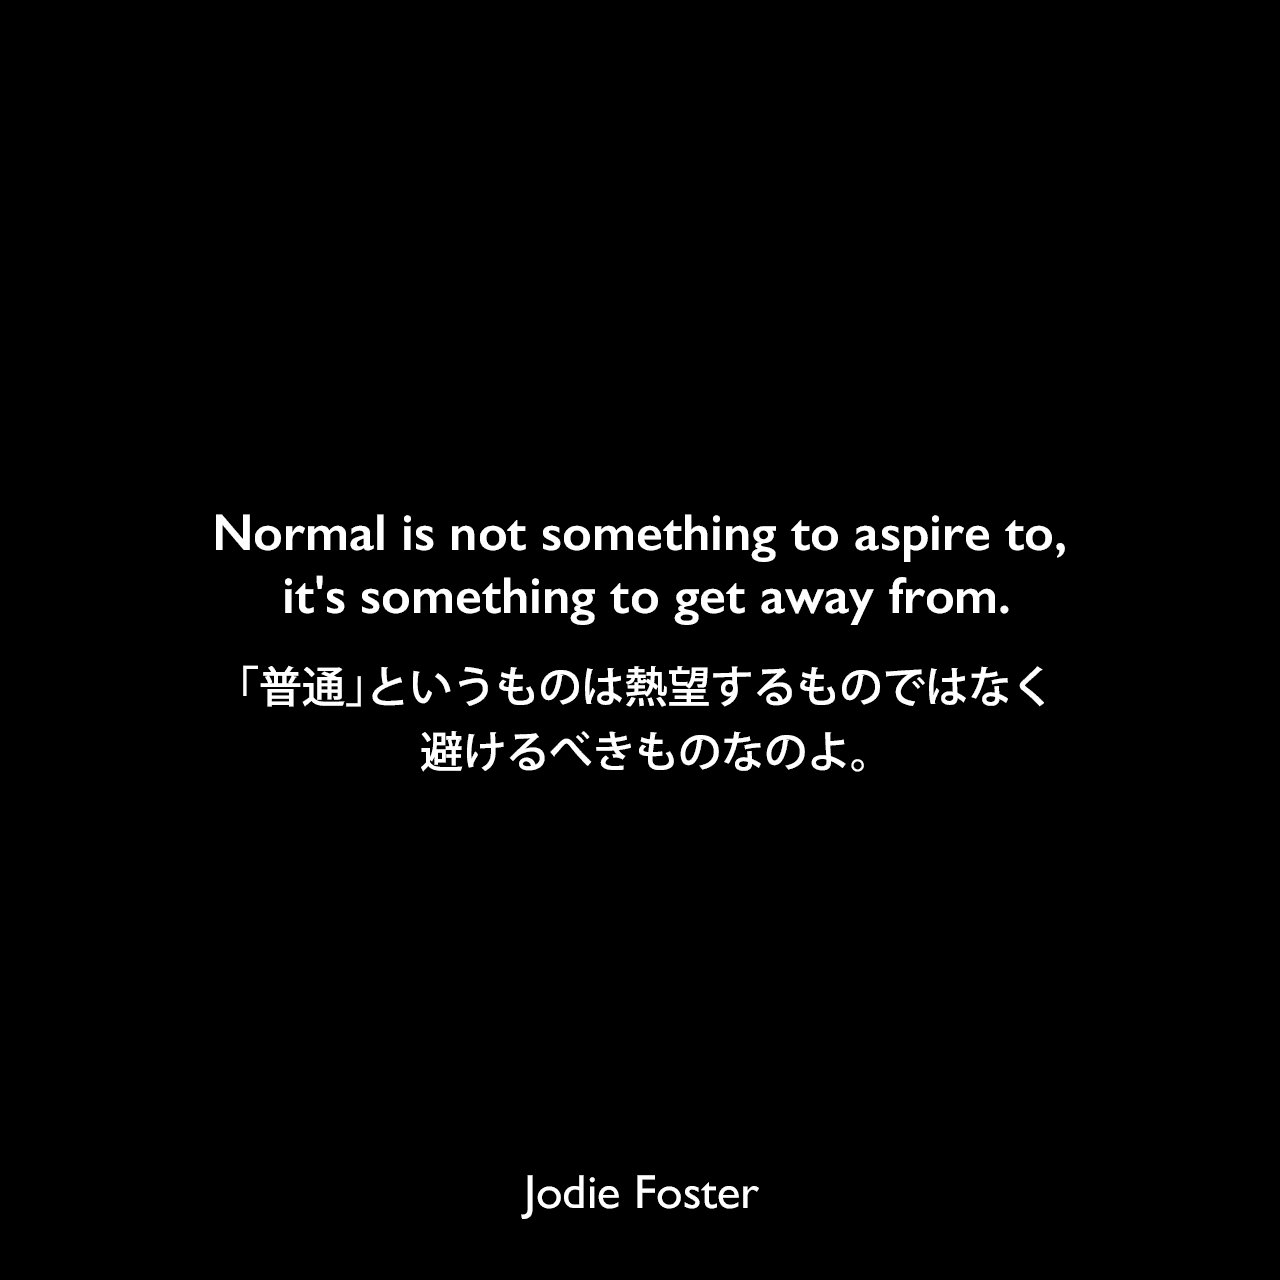 Normal is not something to aspire to, it's something to get away from.「普通」というものは熱望するものではなく、避けるべきものなのよ。Jodie Foster